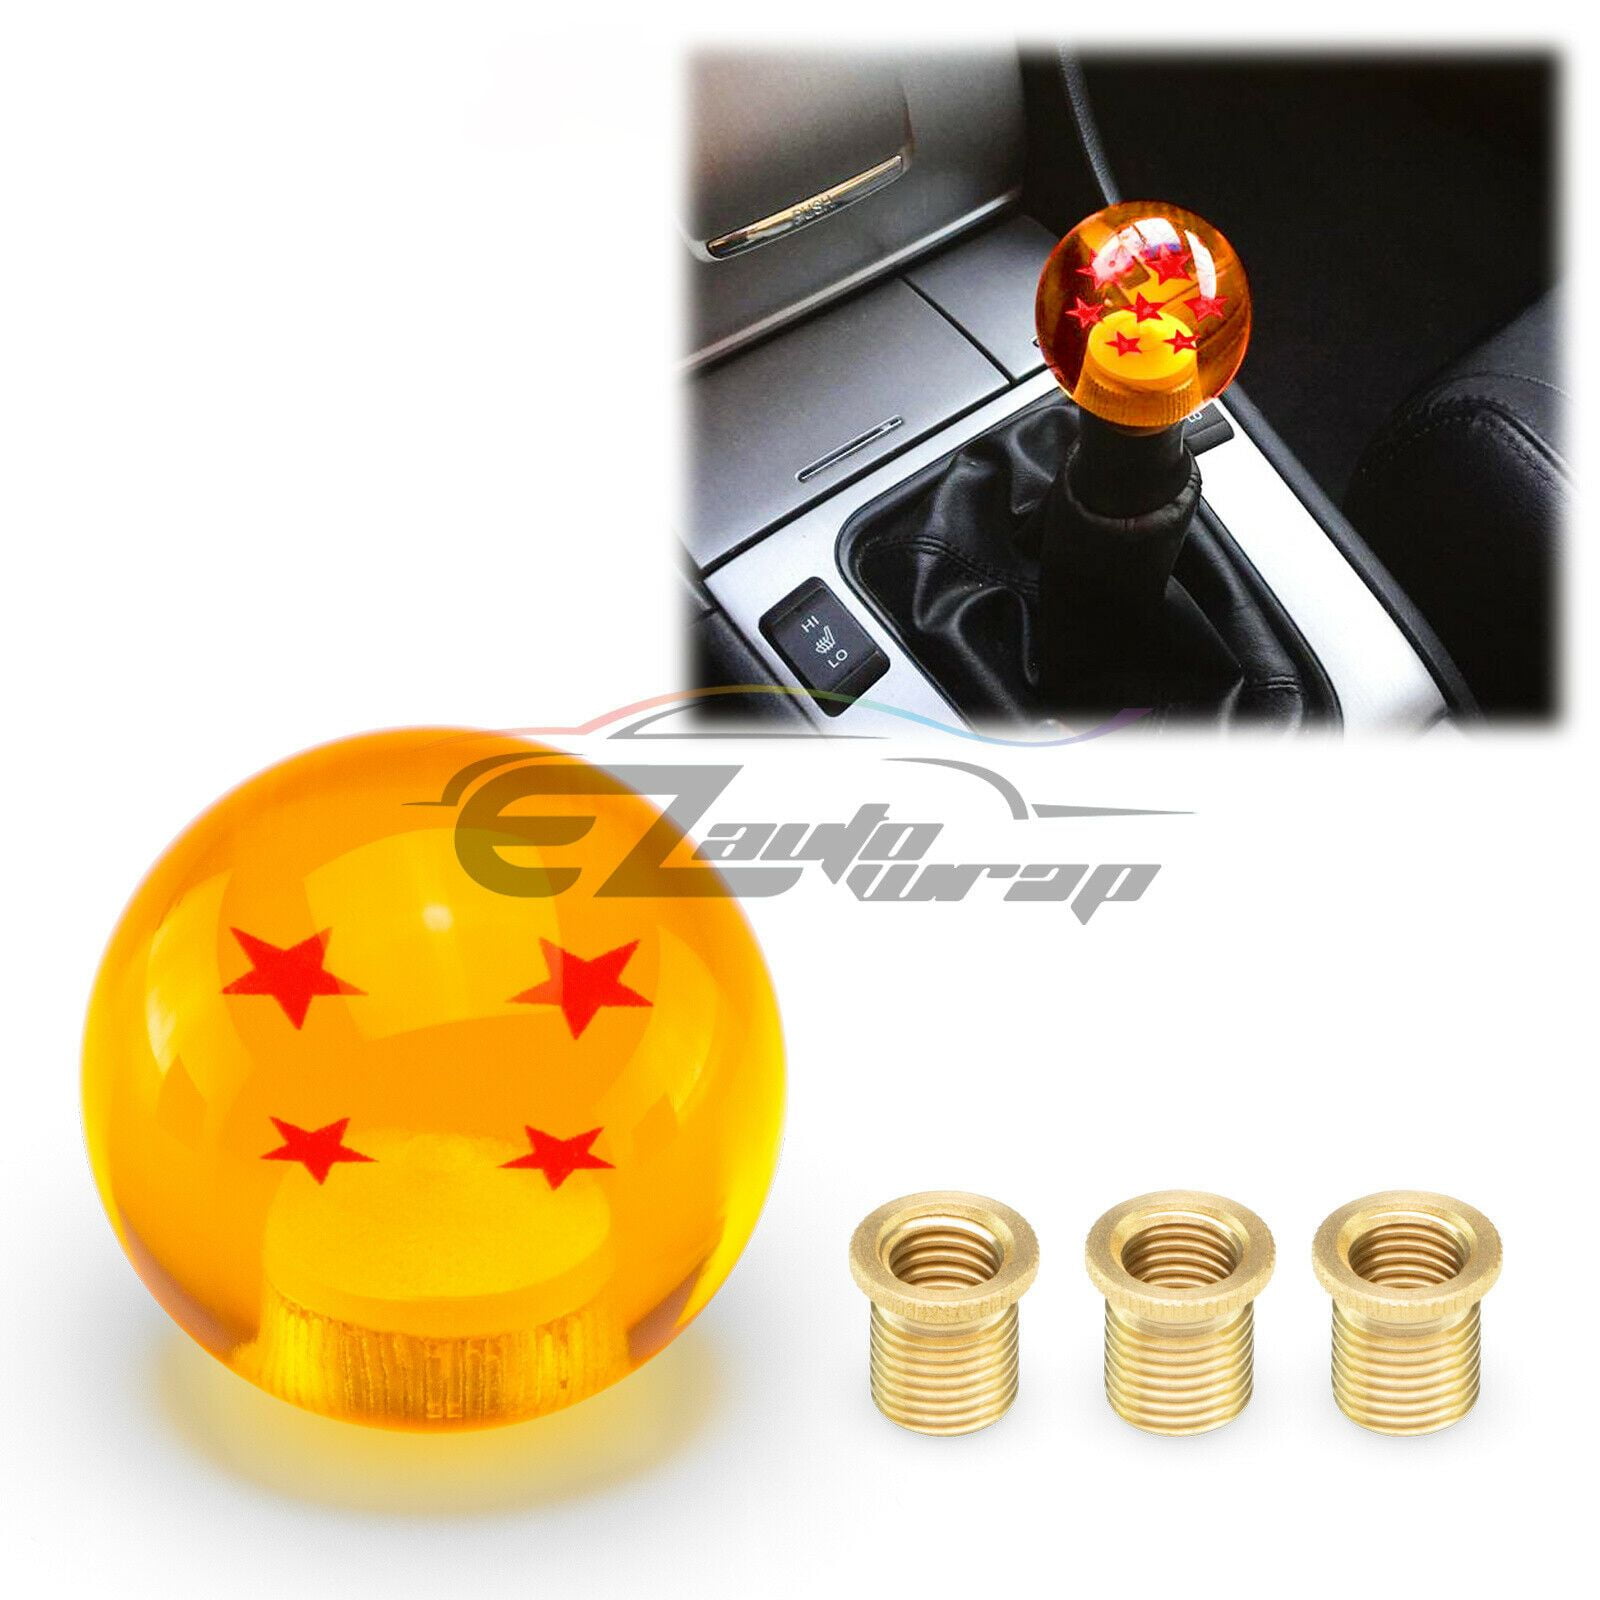 JDMBESTBOY Universal Blue Dragon Ball Z 4 Star 54mm Shift Knob with Adapters Will Fit Most Cars